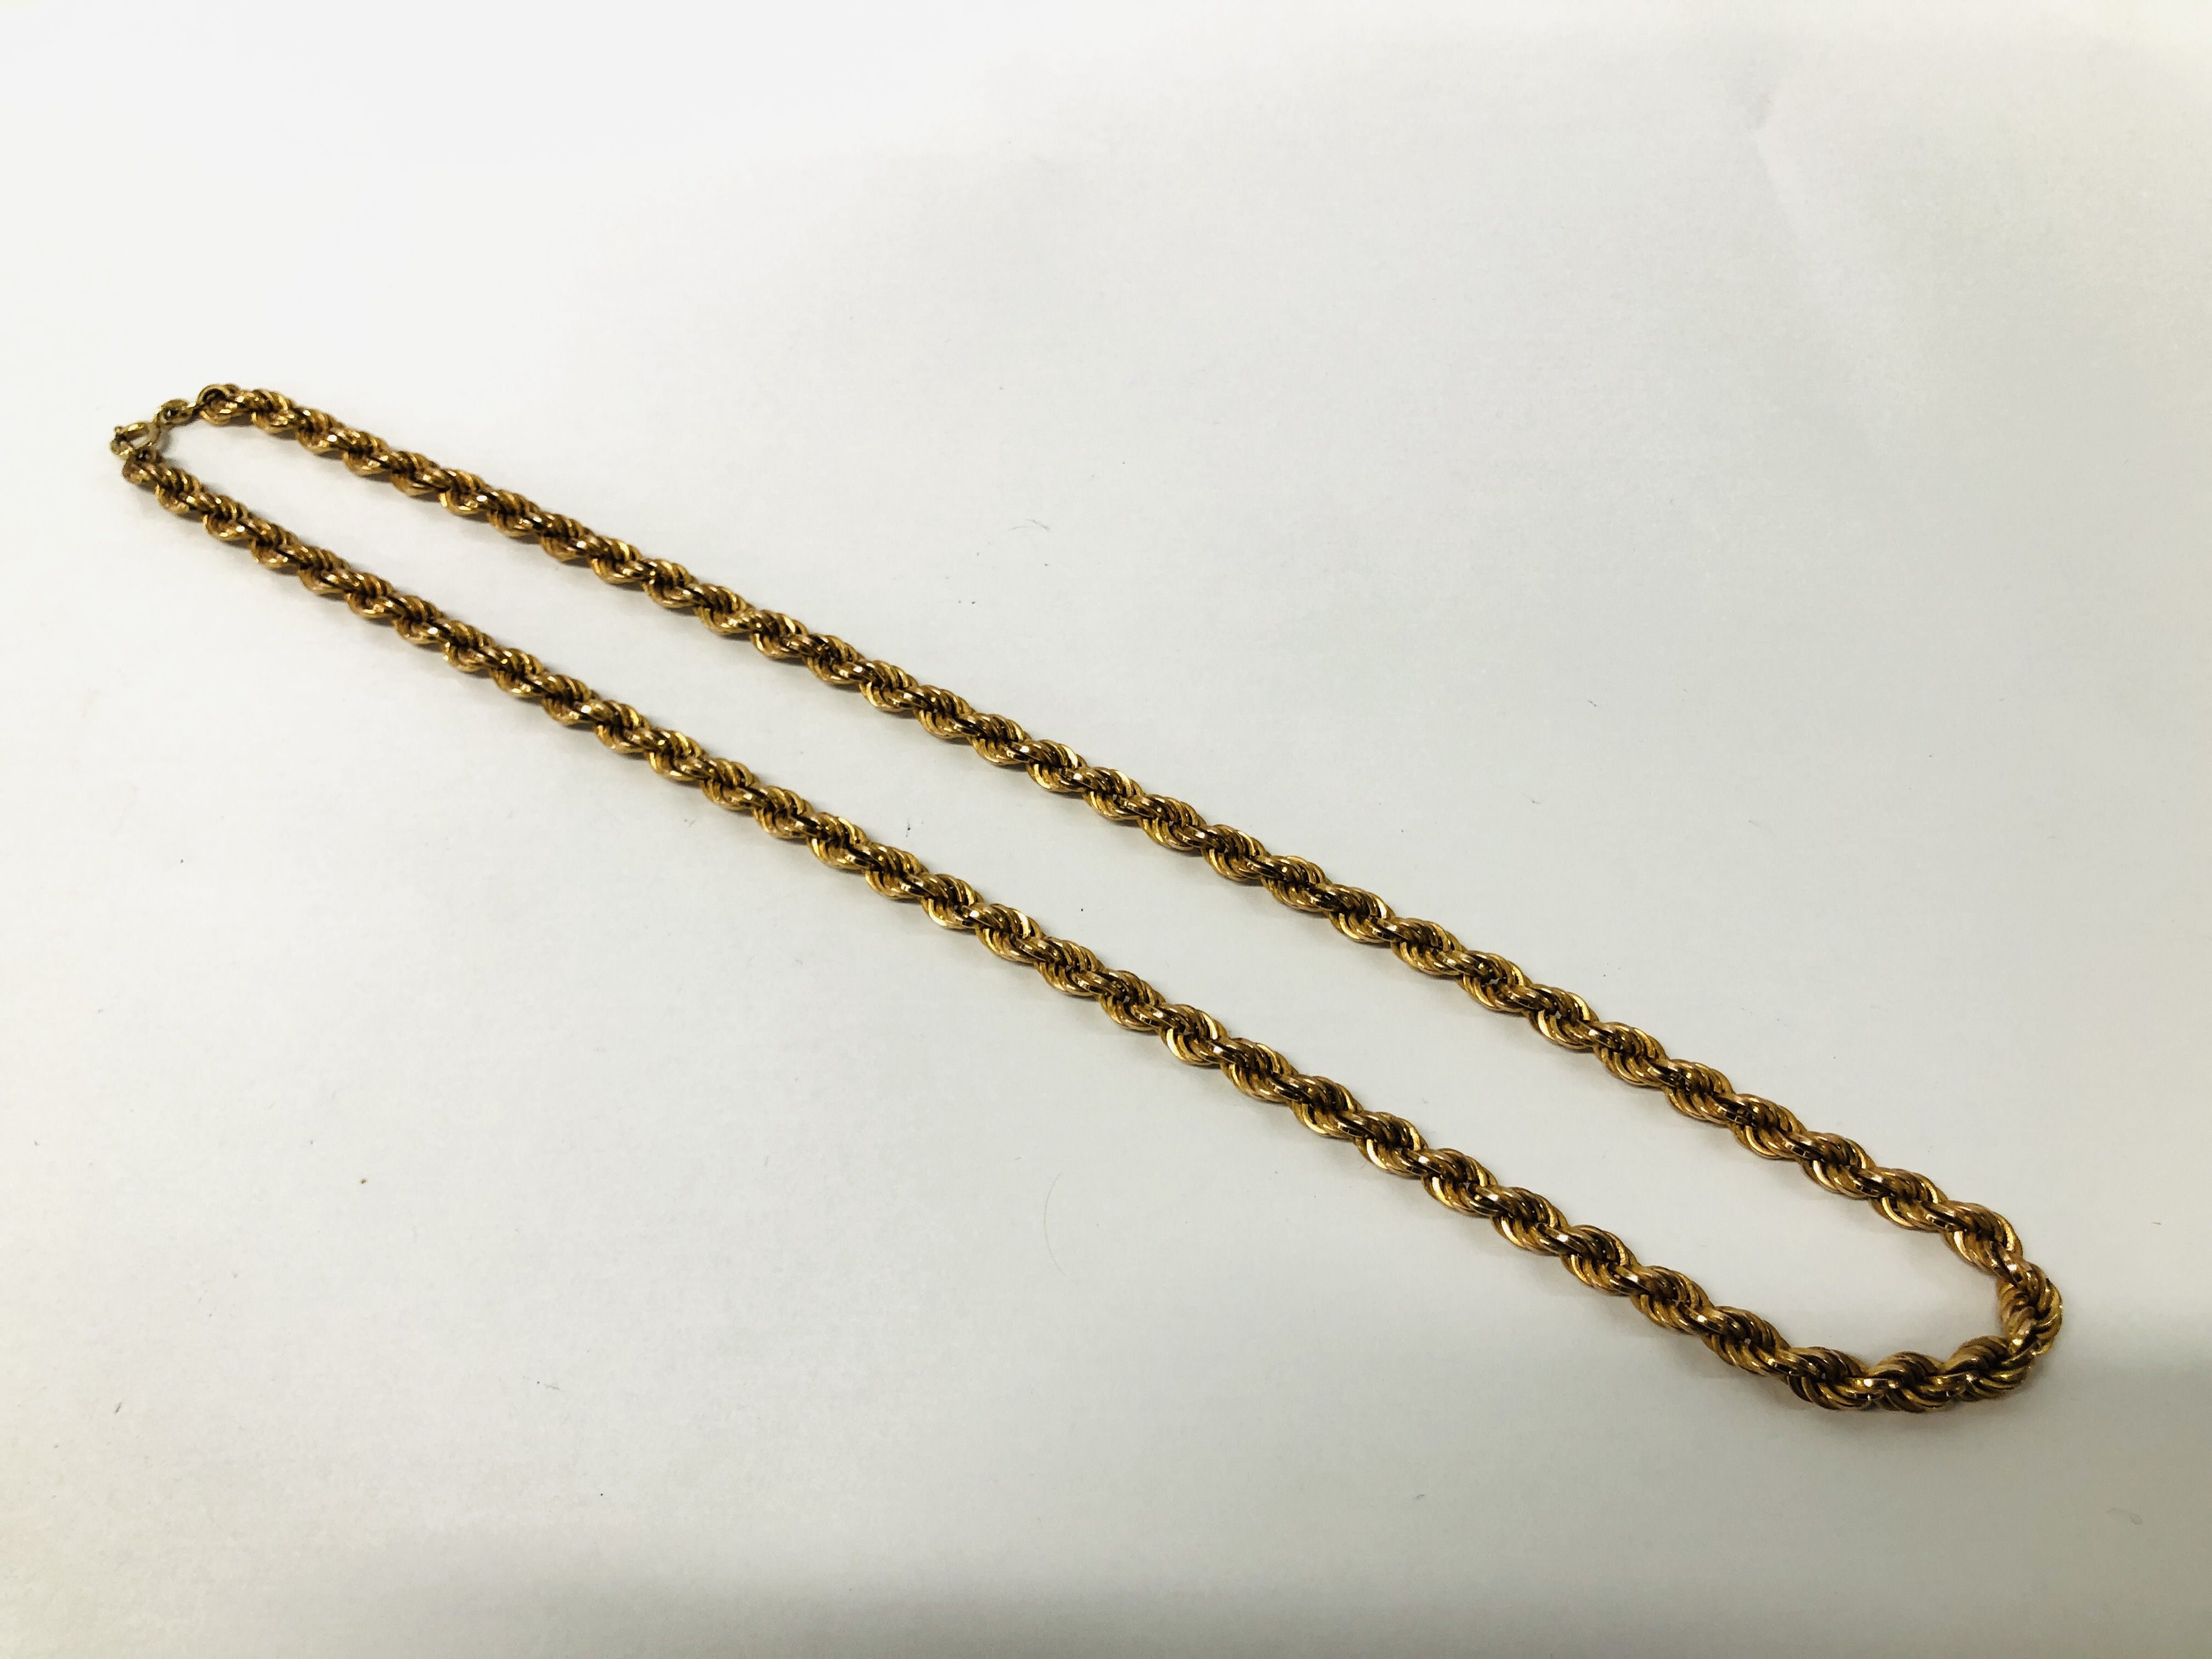 A 9CT GOLD ROPE NECKLACE - LENGTH 60CM